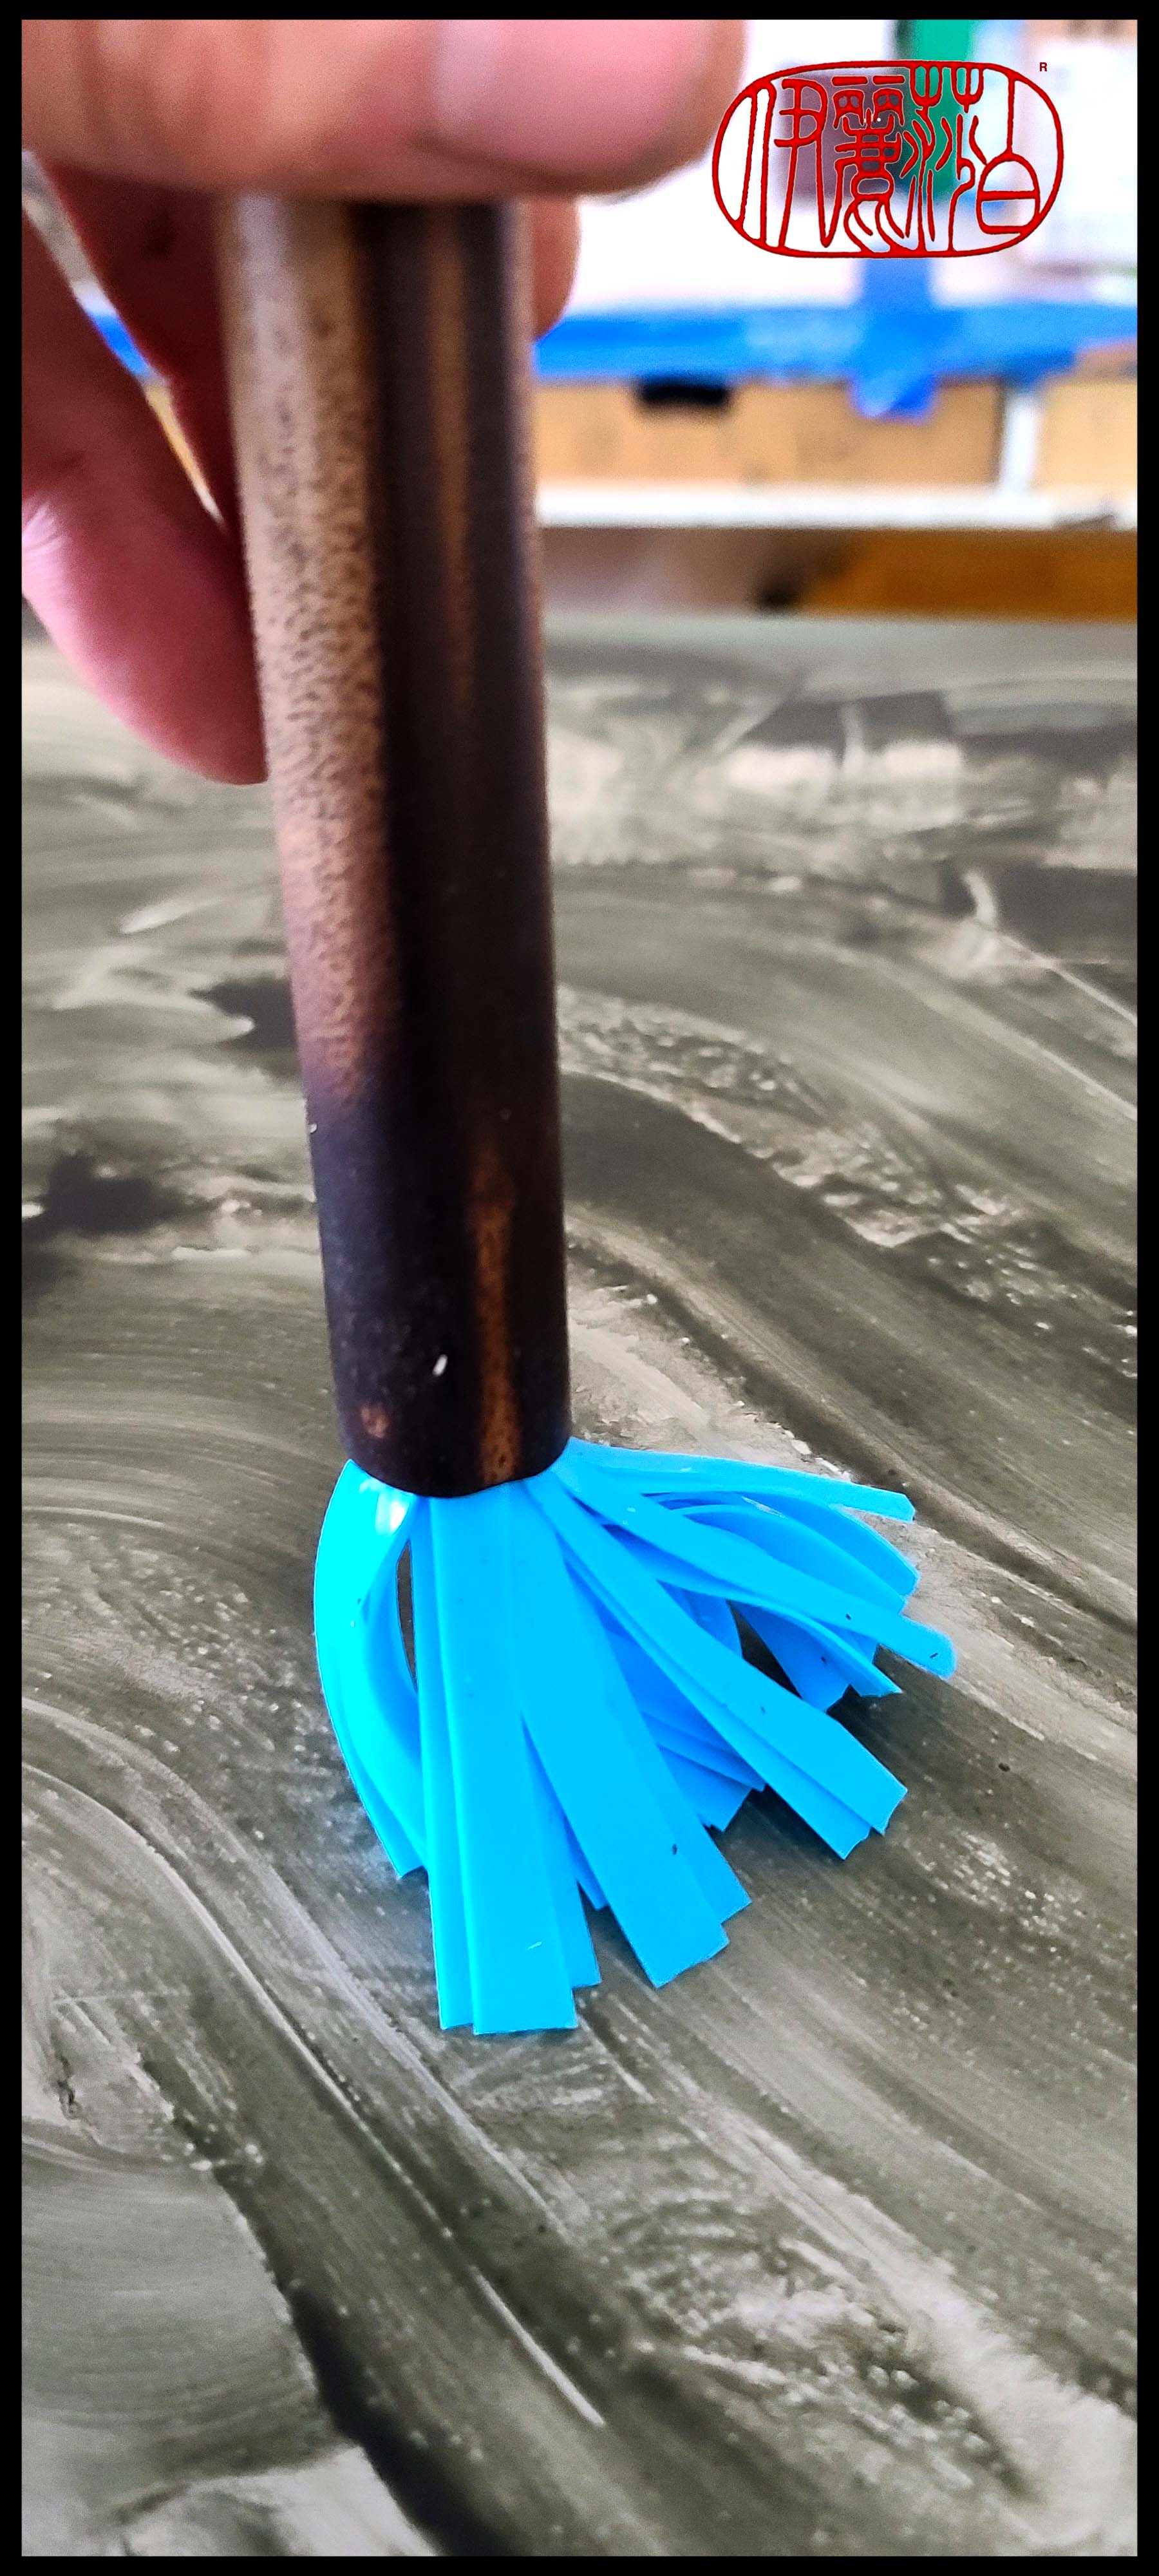 Sinful Brush Cleaner / Paintbrush Cleaning Tool 